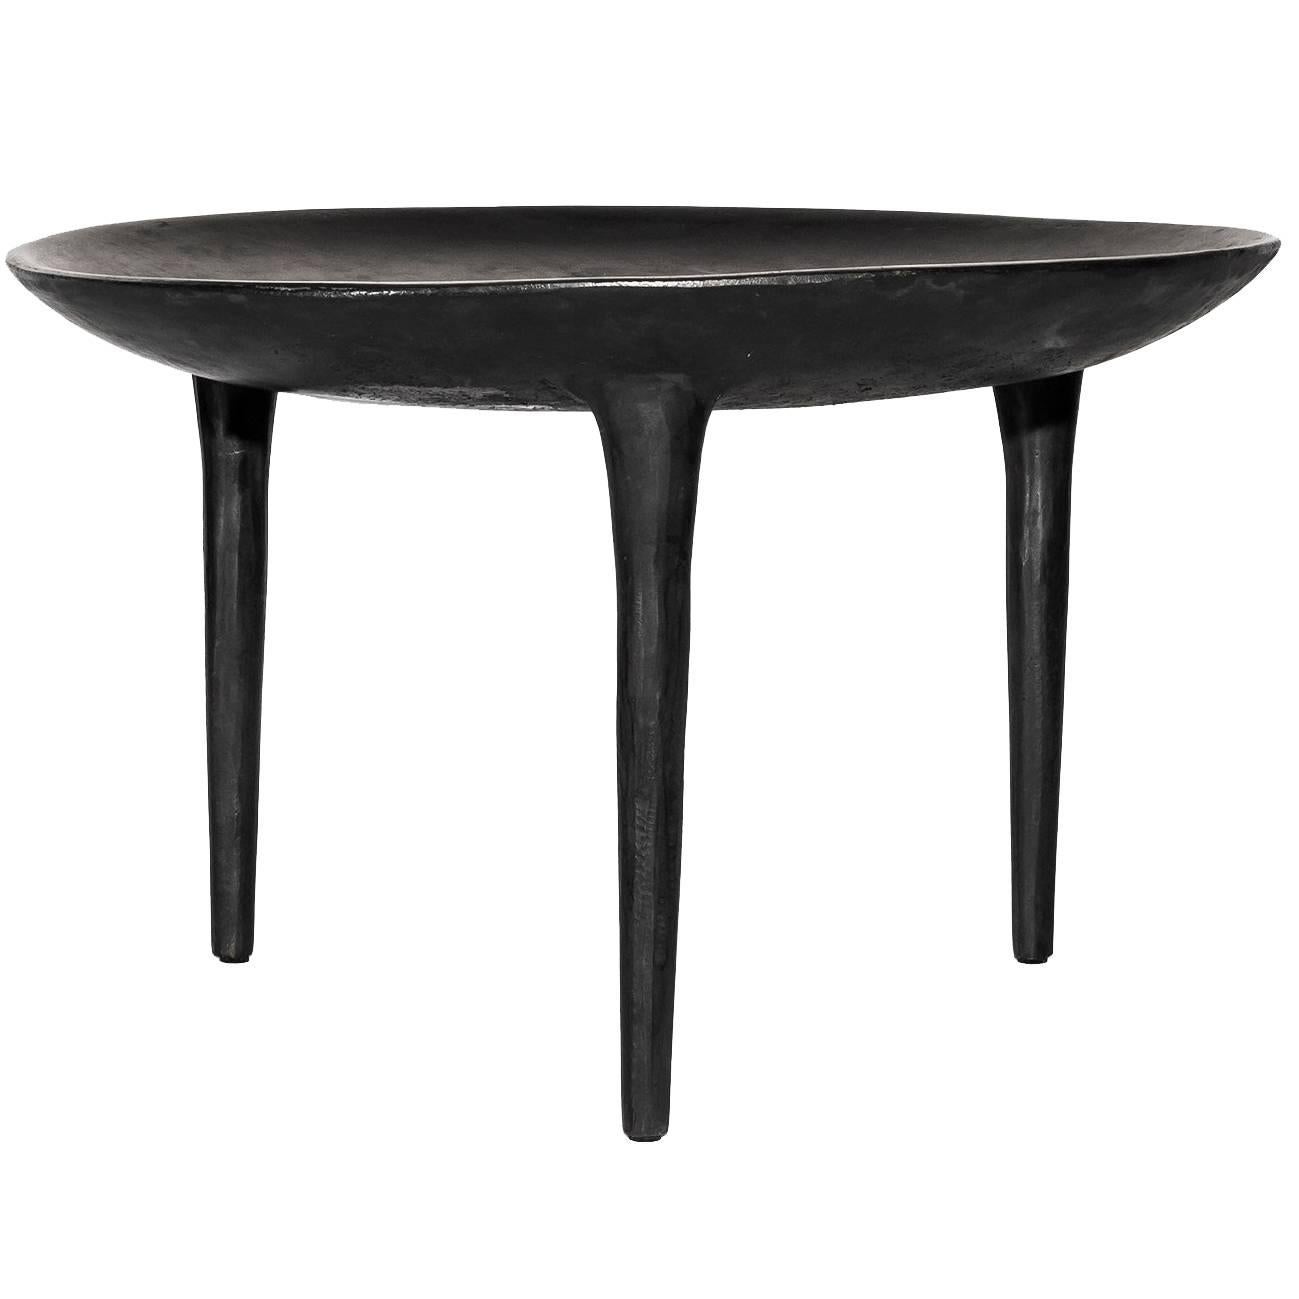 Bronze Brazier Table by Contemporary Artist Rick Owens in Black/Noir Finish For Sale